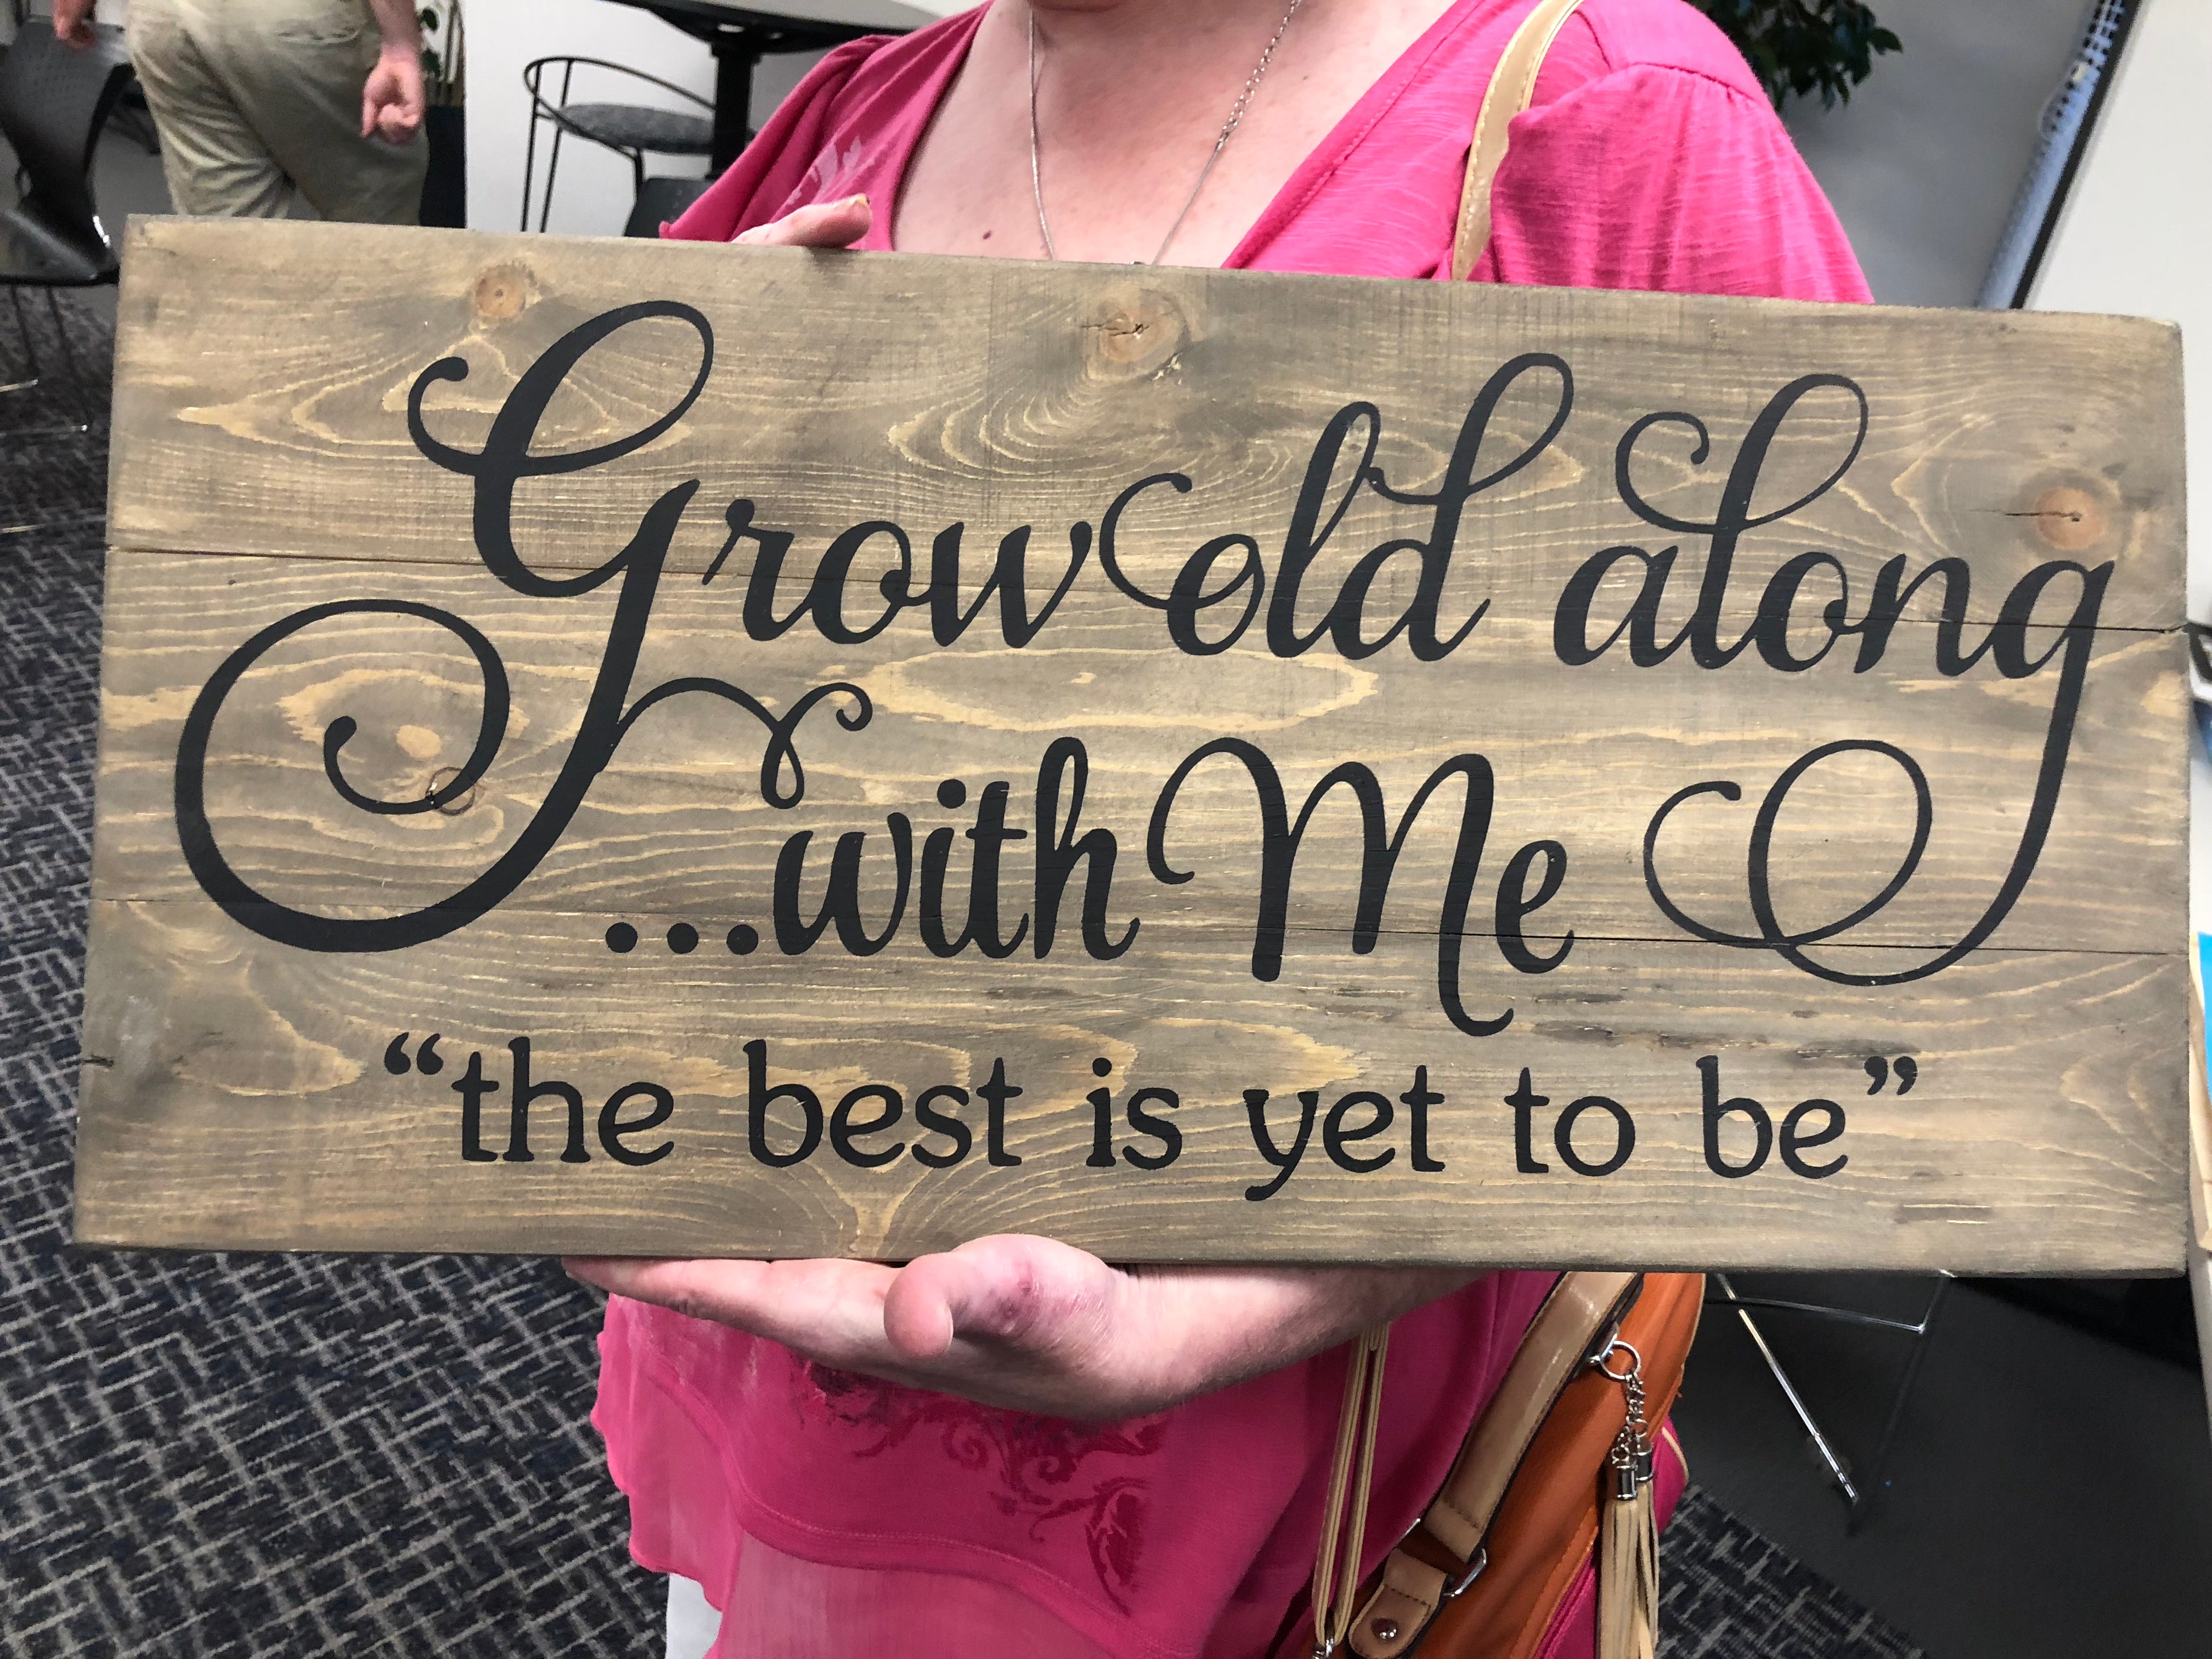 Grow old along with me